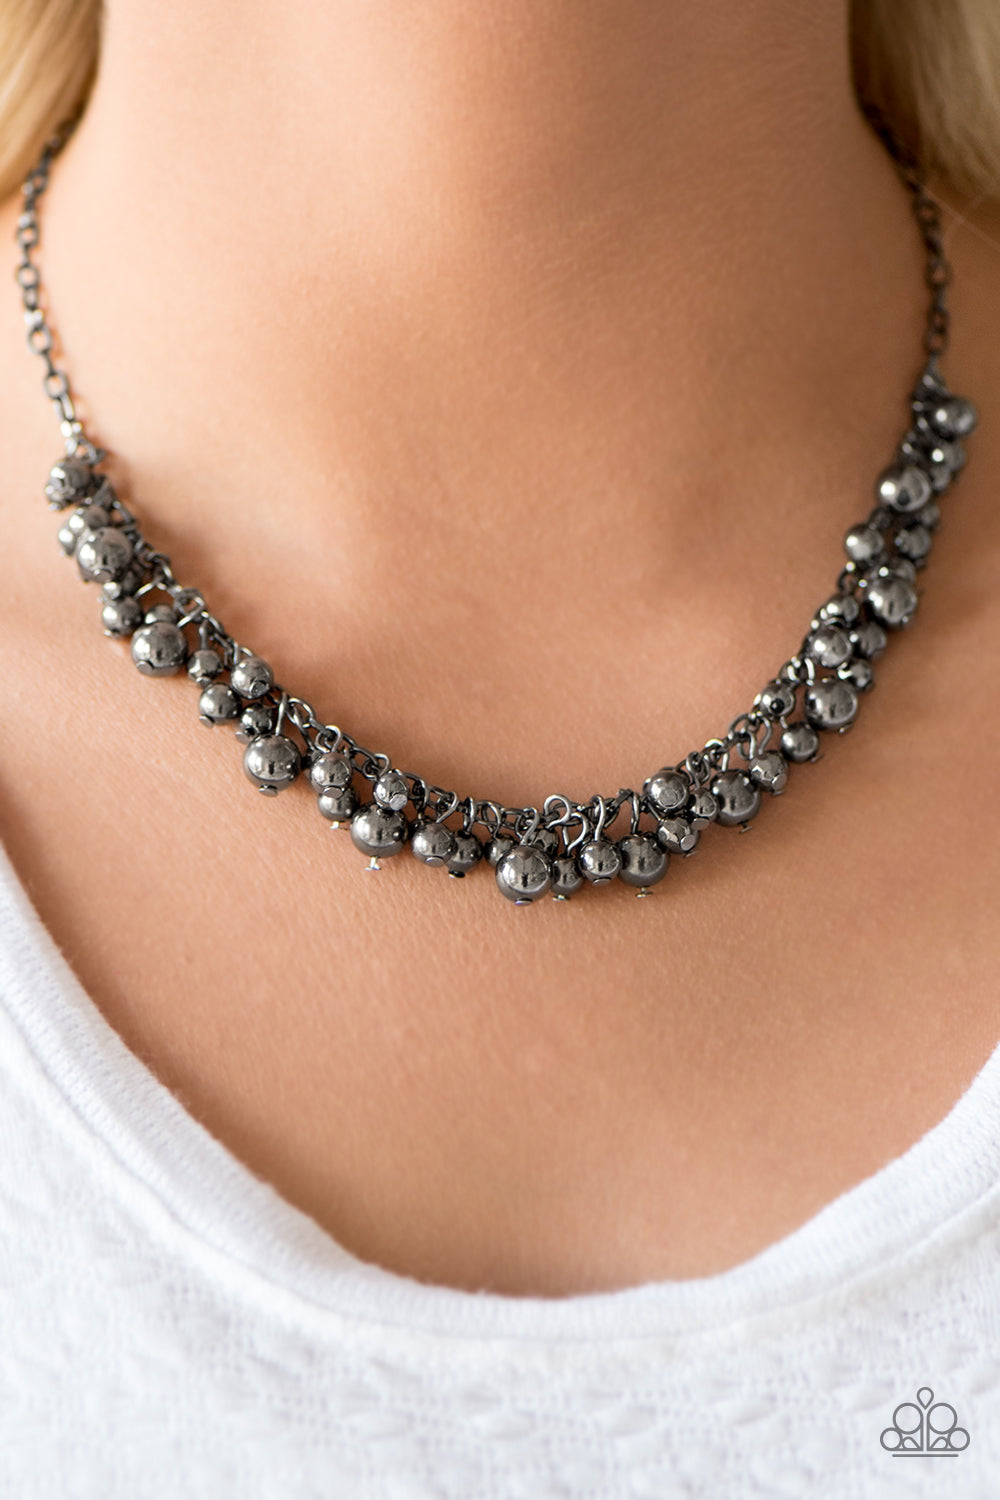 Paparazzi Necklace - Belle of the Ball - Black